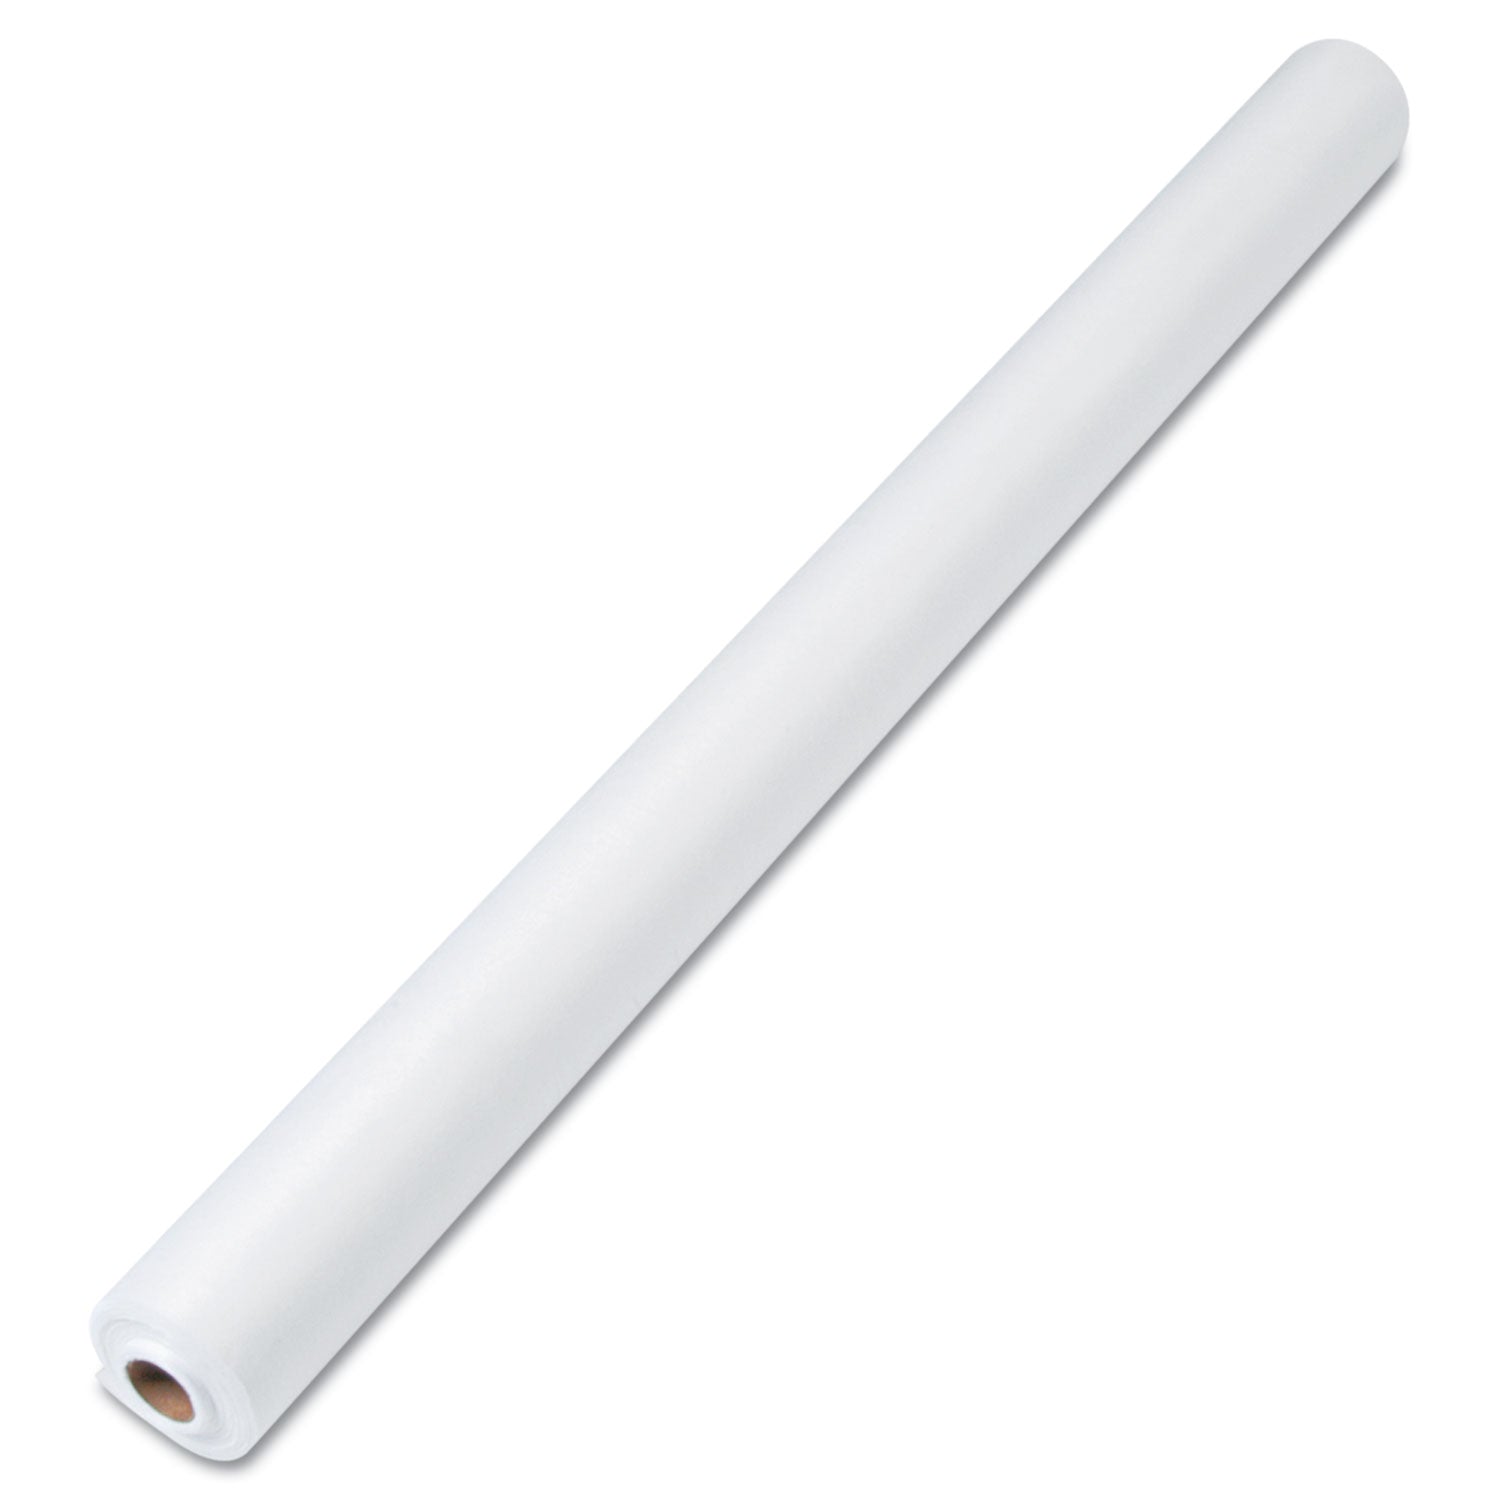 Linen-Soft Non-Woven Polyester Banquet Roll, Cut-To-Fit, 40" x 50 ft, White - 